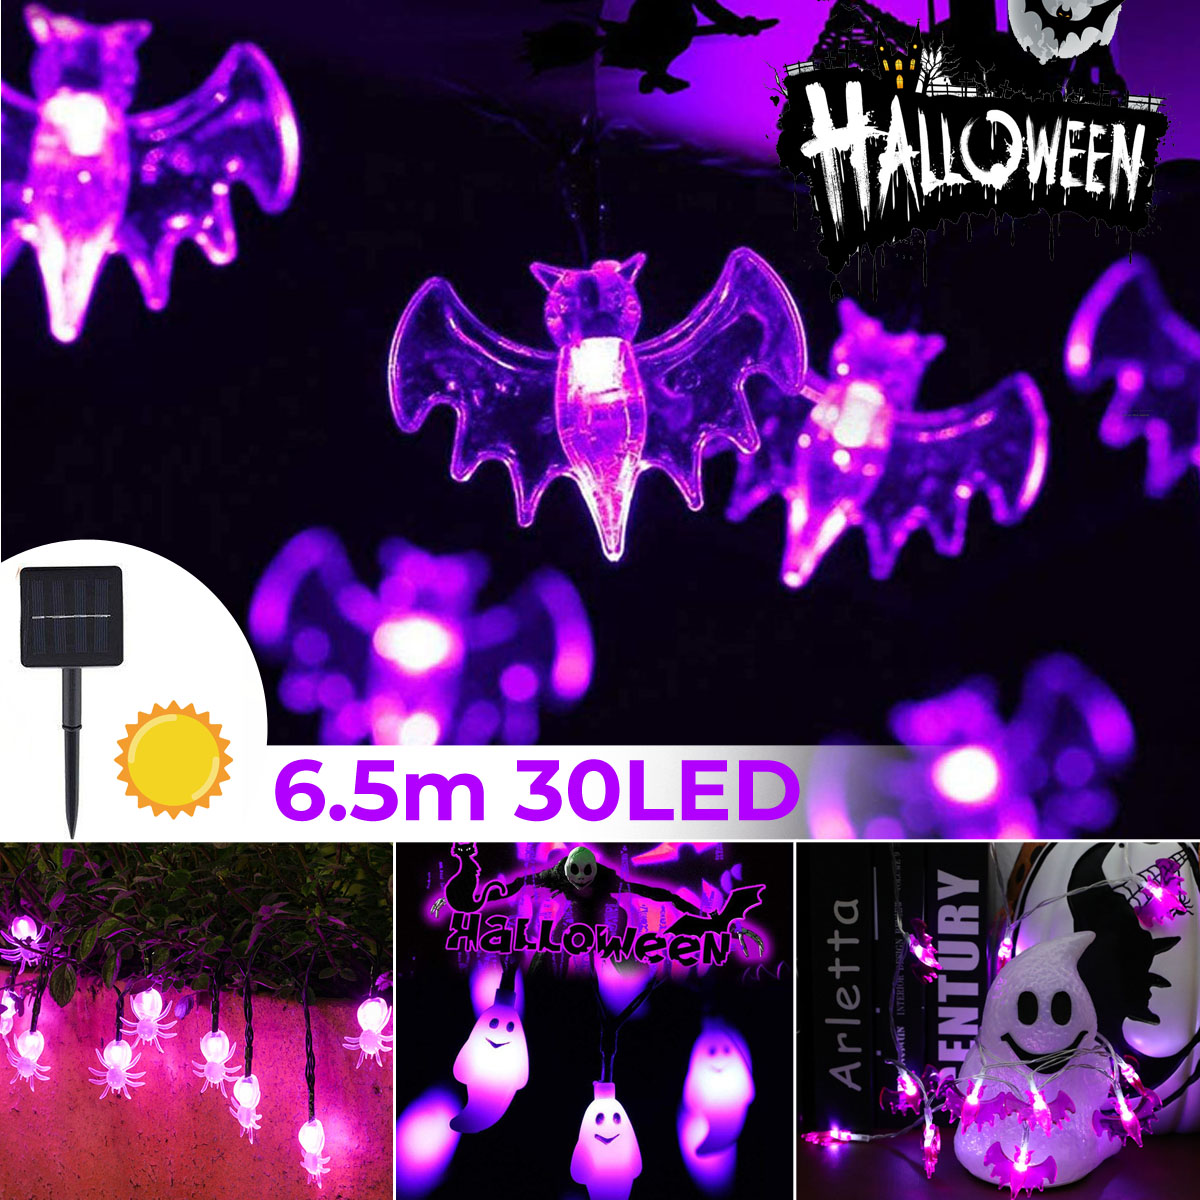 65M-30-LED-Ball-Solar-Halloween-Party-Fairy-Outdoor-String-Lights-for-Patio-Garden-8-Mode-Adjustment-1741092-1